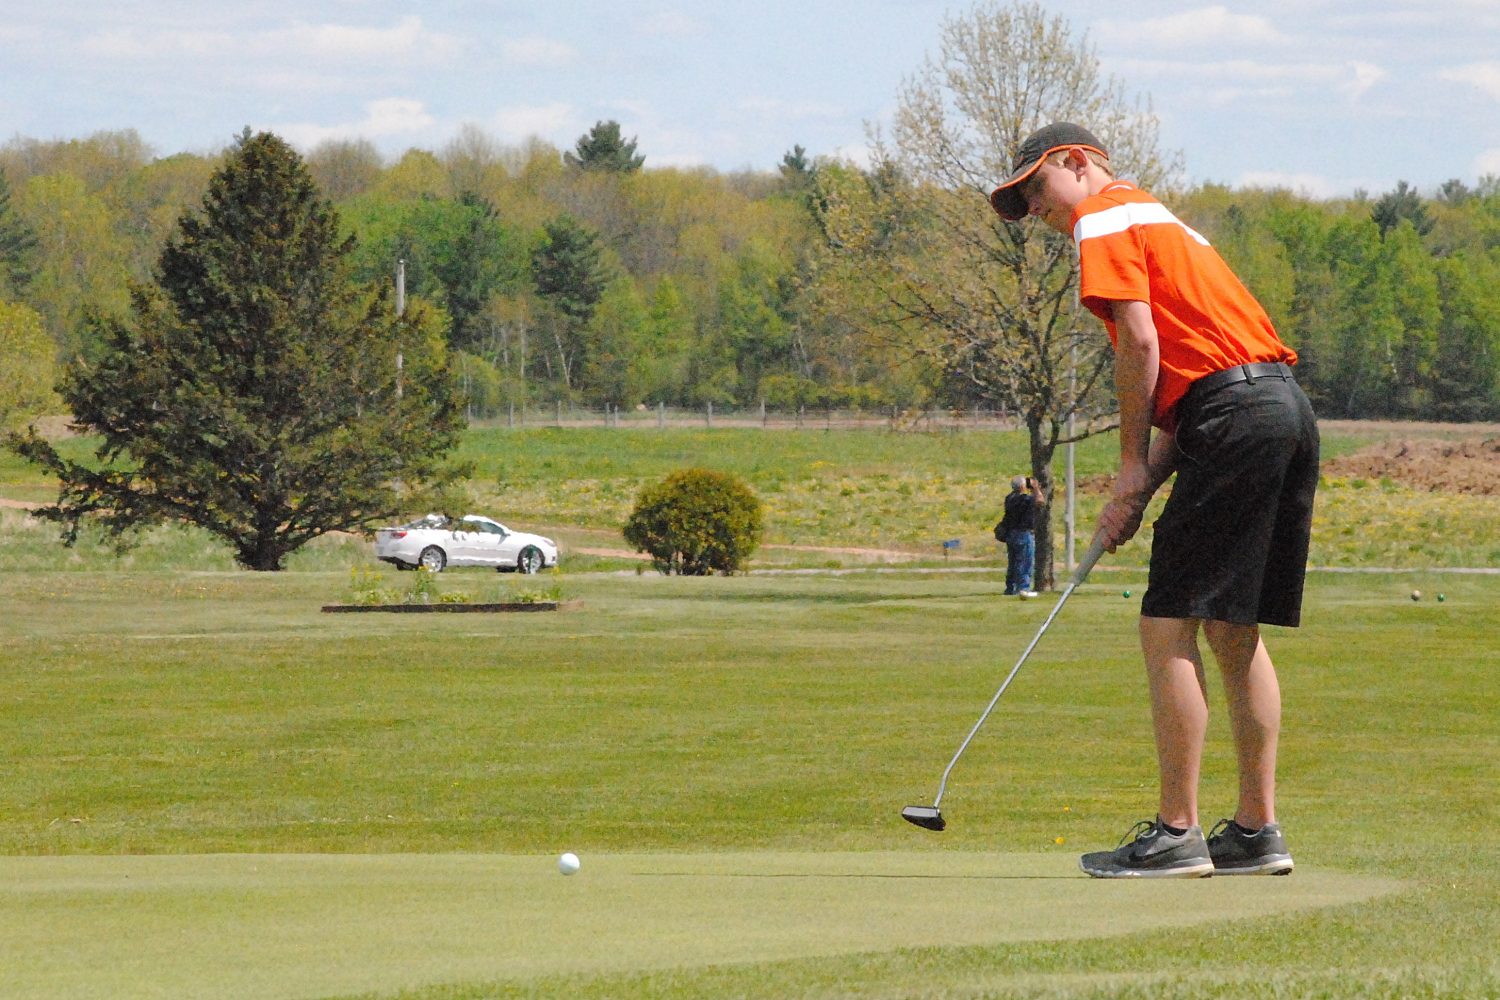 Marshfield’s Zach Hanson hits a putt on the par-3 fifth hole during the Wisconsin Valley Conference Boys Golf Meet on Tuesday at RiverEdge Golf Course in Marshfield. The Tigers finished fourth.